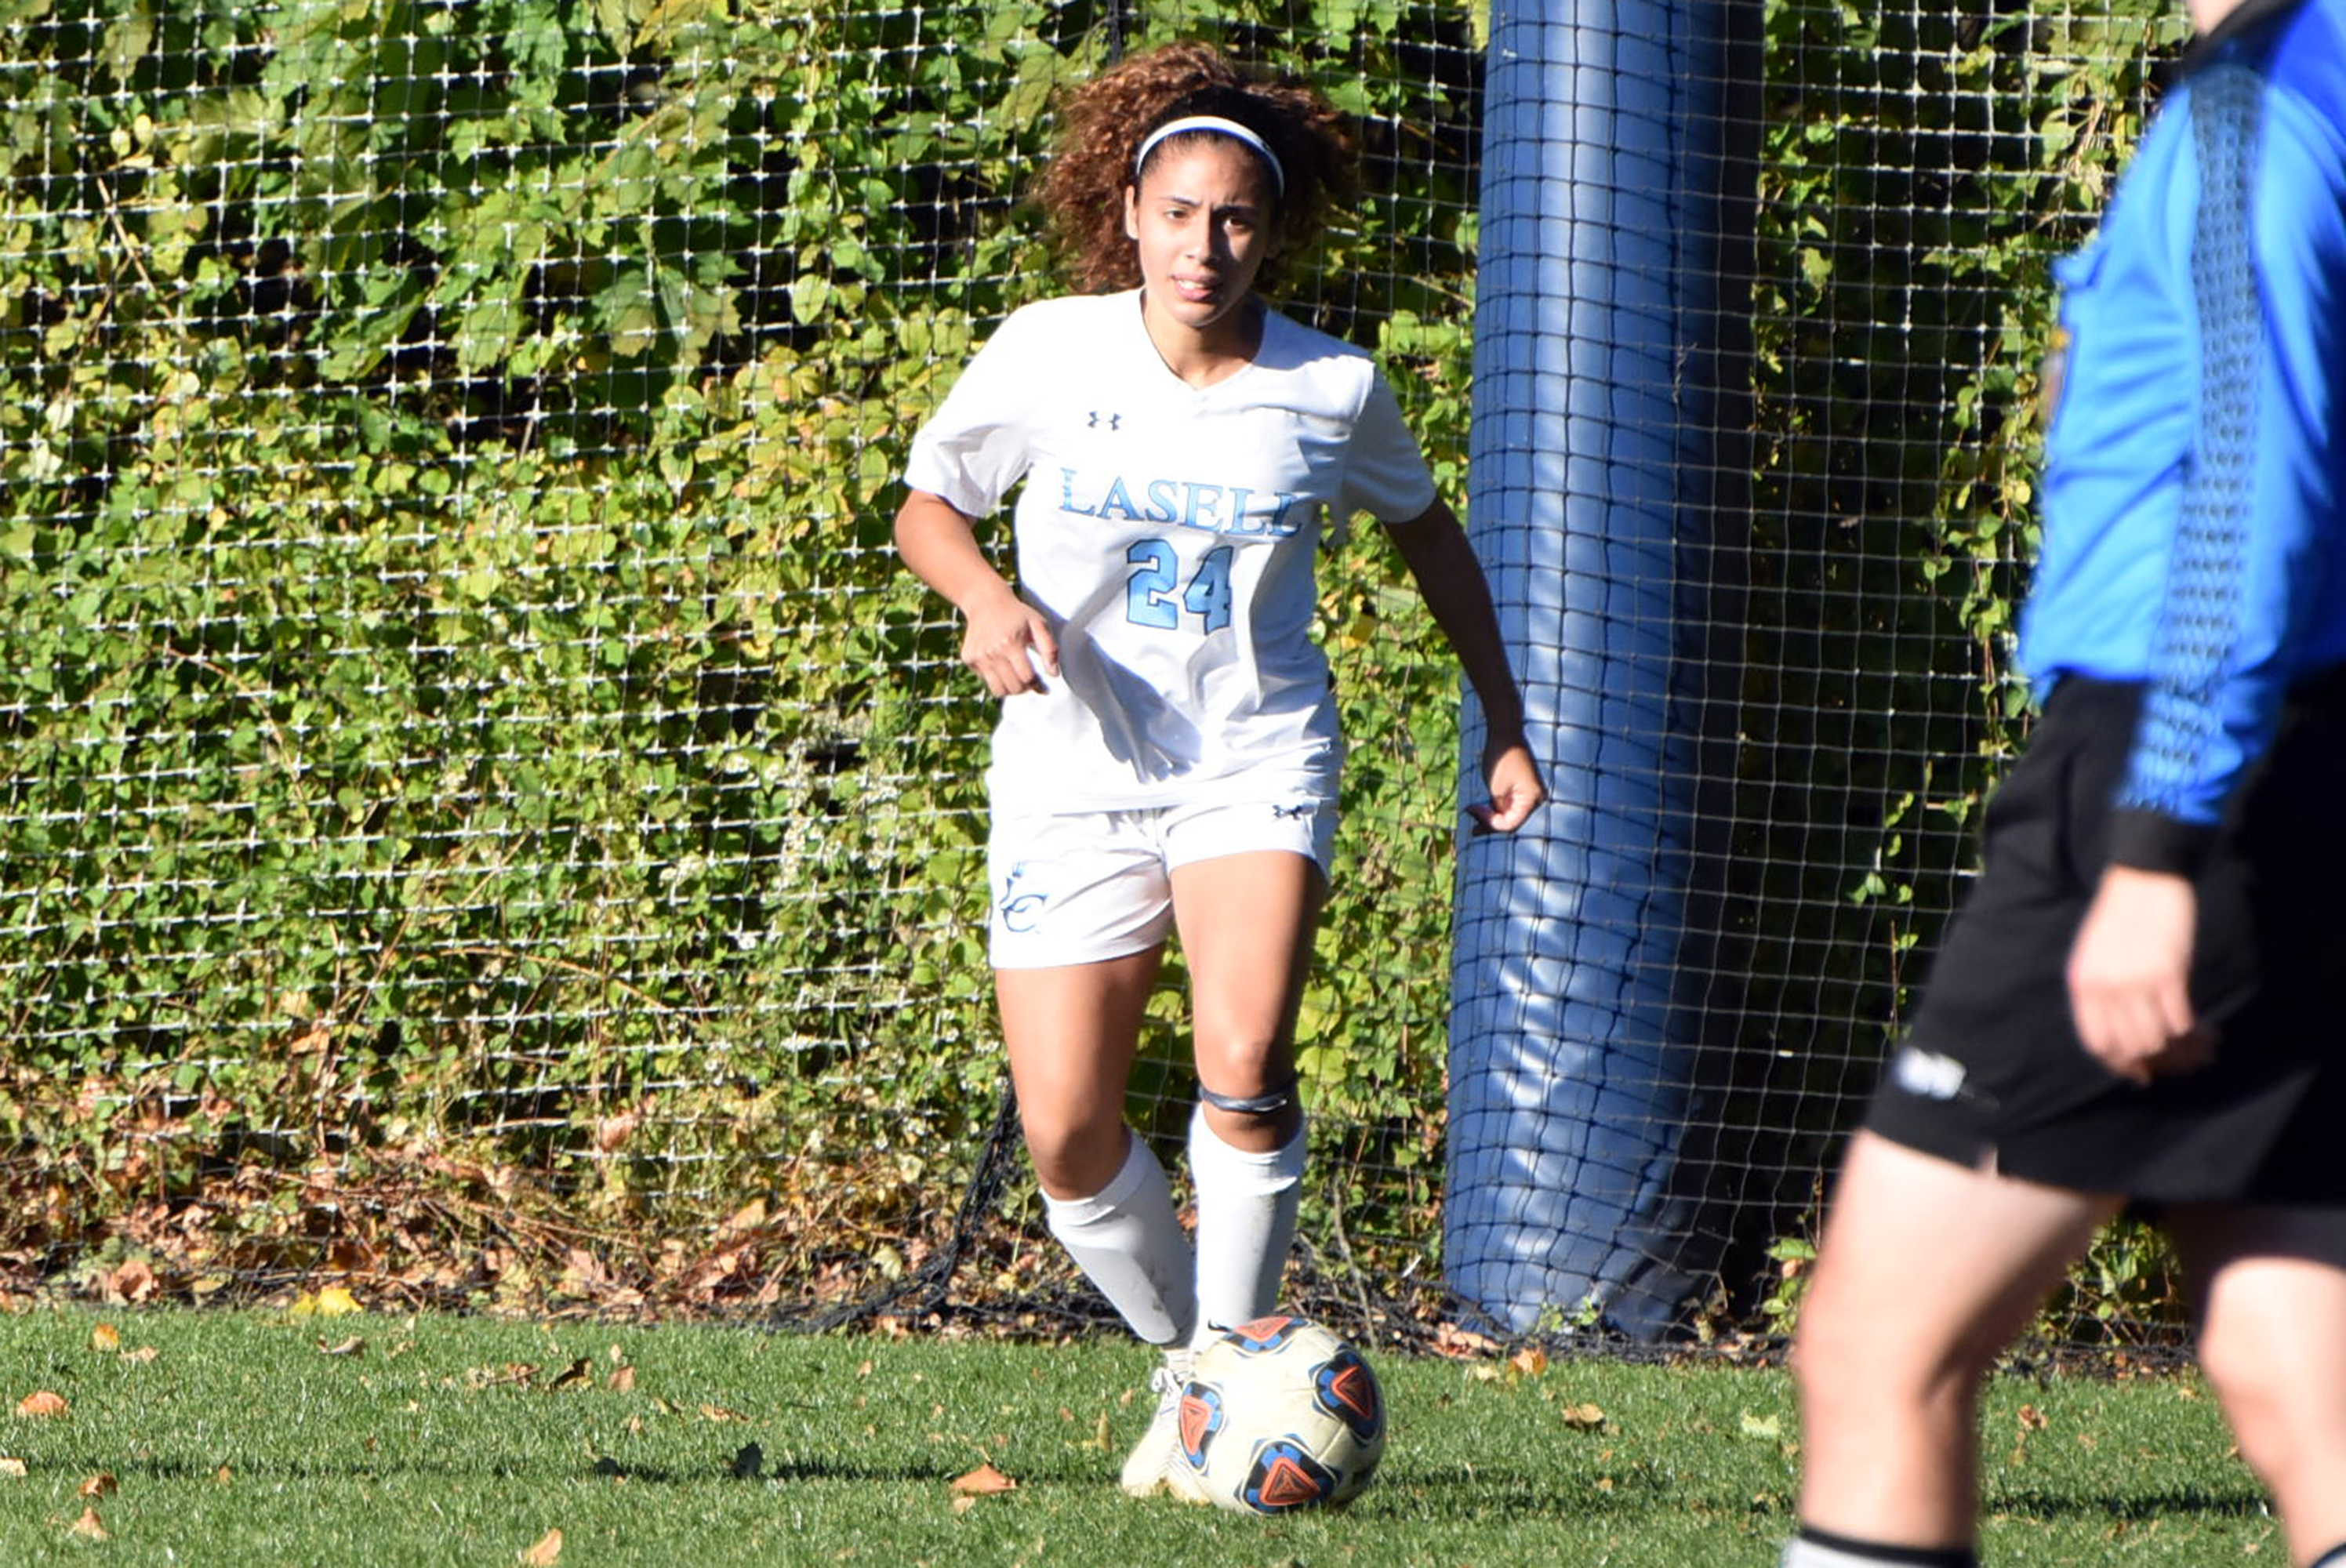 WSOC: Lasell blanks Rivier in GNAC road game; Speight, Lorenzo score for Lasers